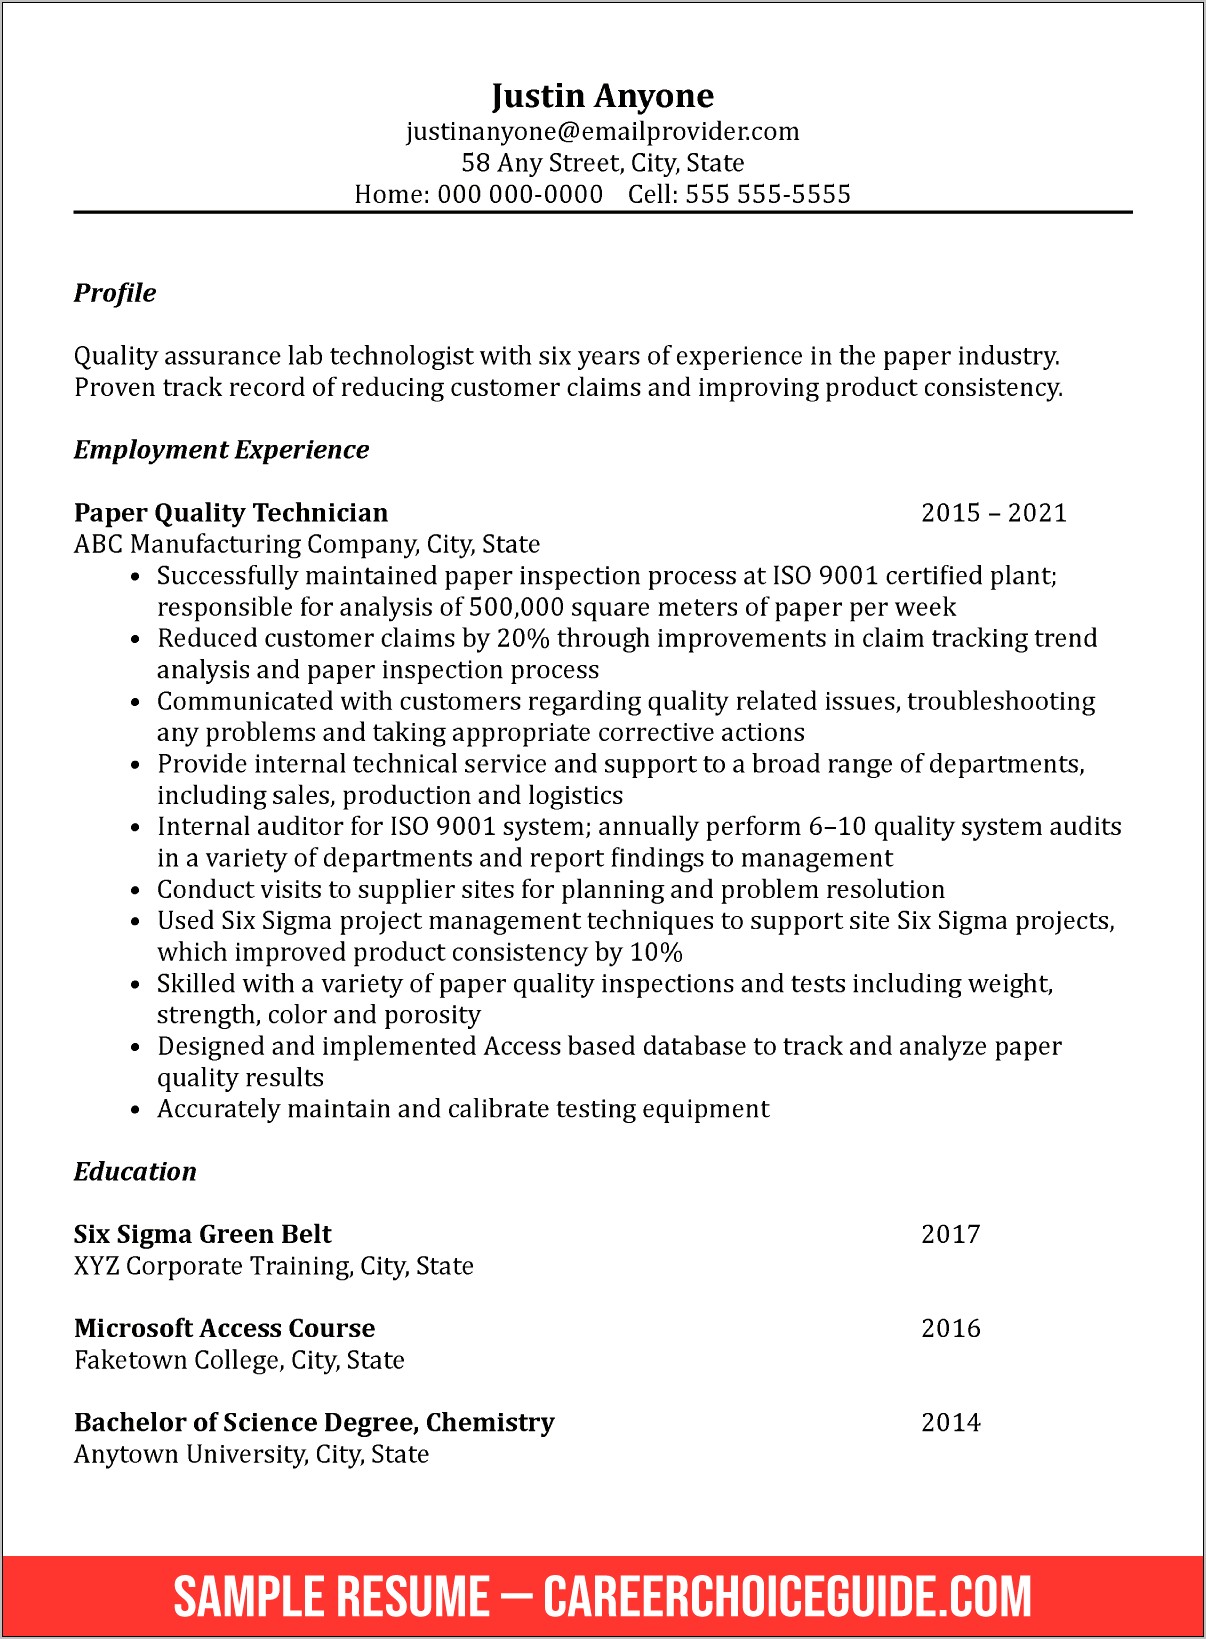 Quality Control Experience Sample Resume